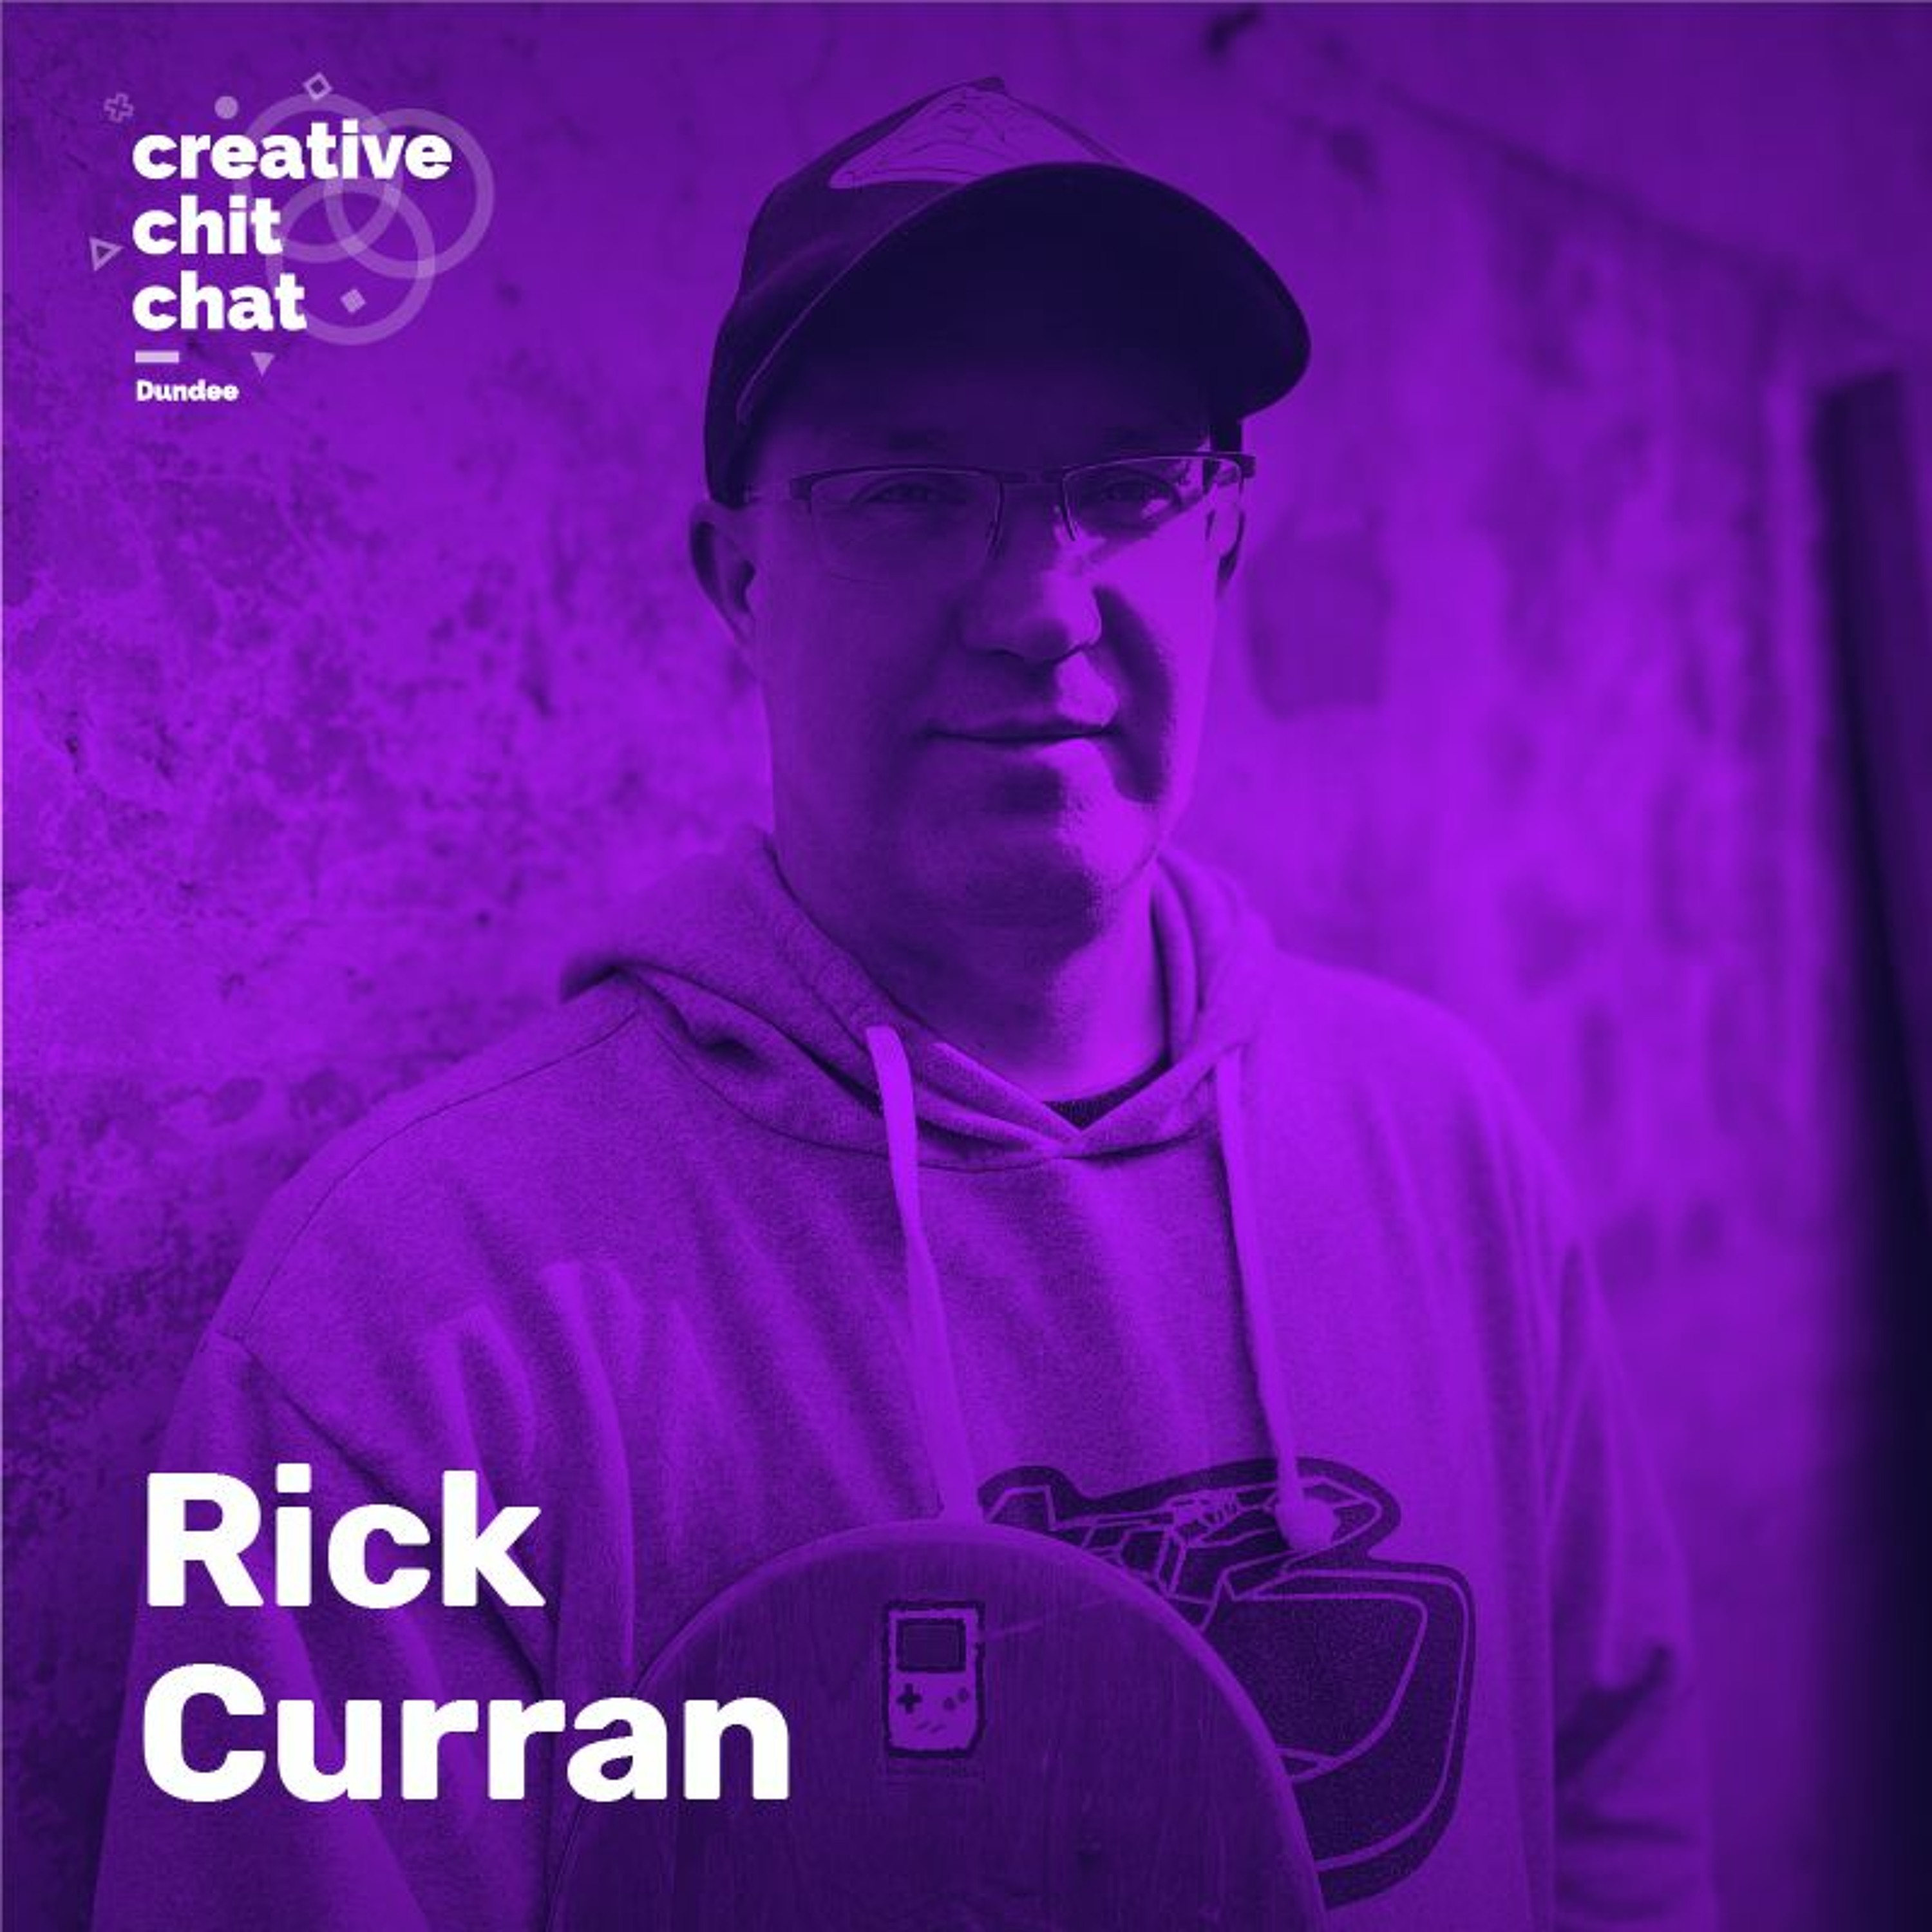 Rick Curran - Dundee’s skate history through the lens of a web developer